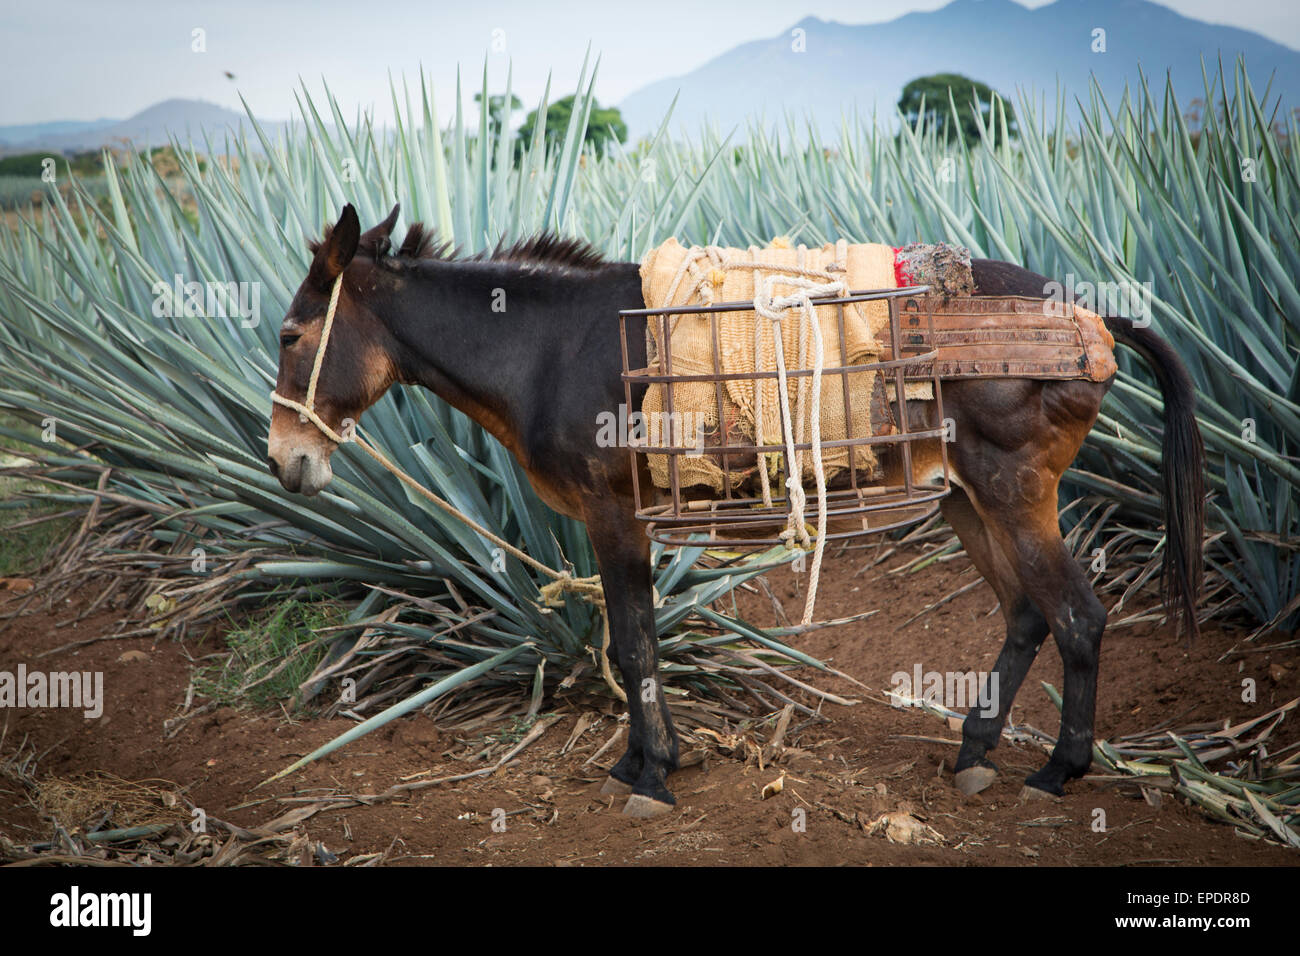 Blue agave, Harvest, Tequila, Jalisco, Mexico Stock Photo